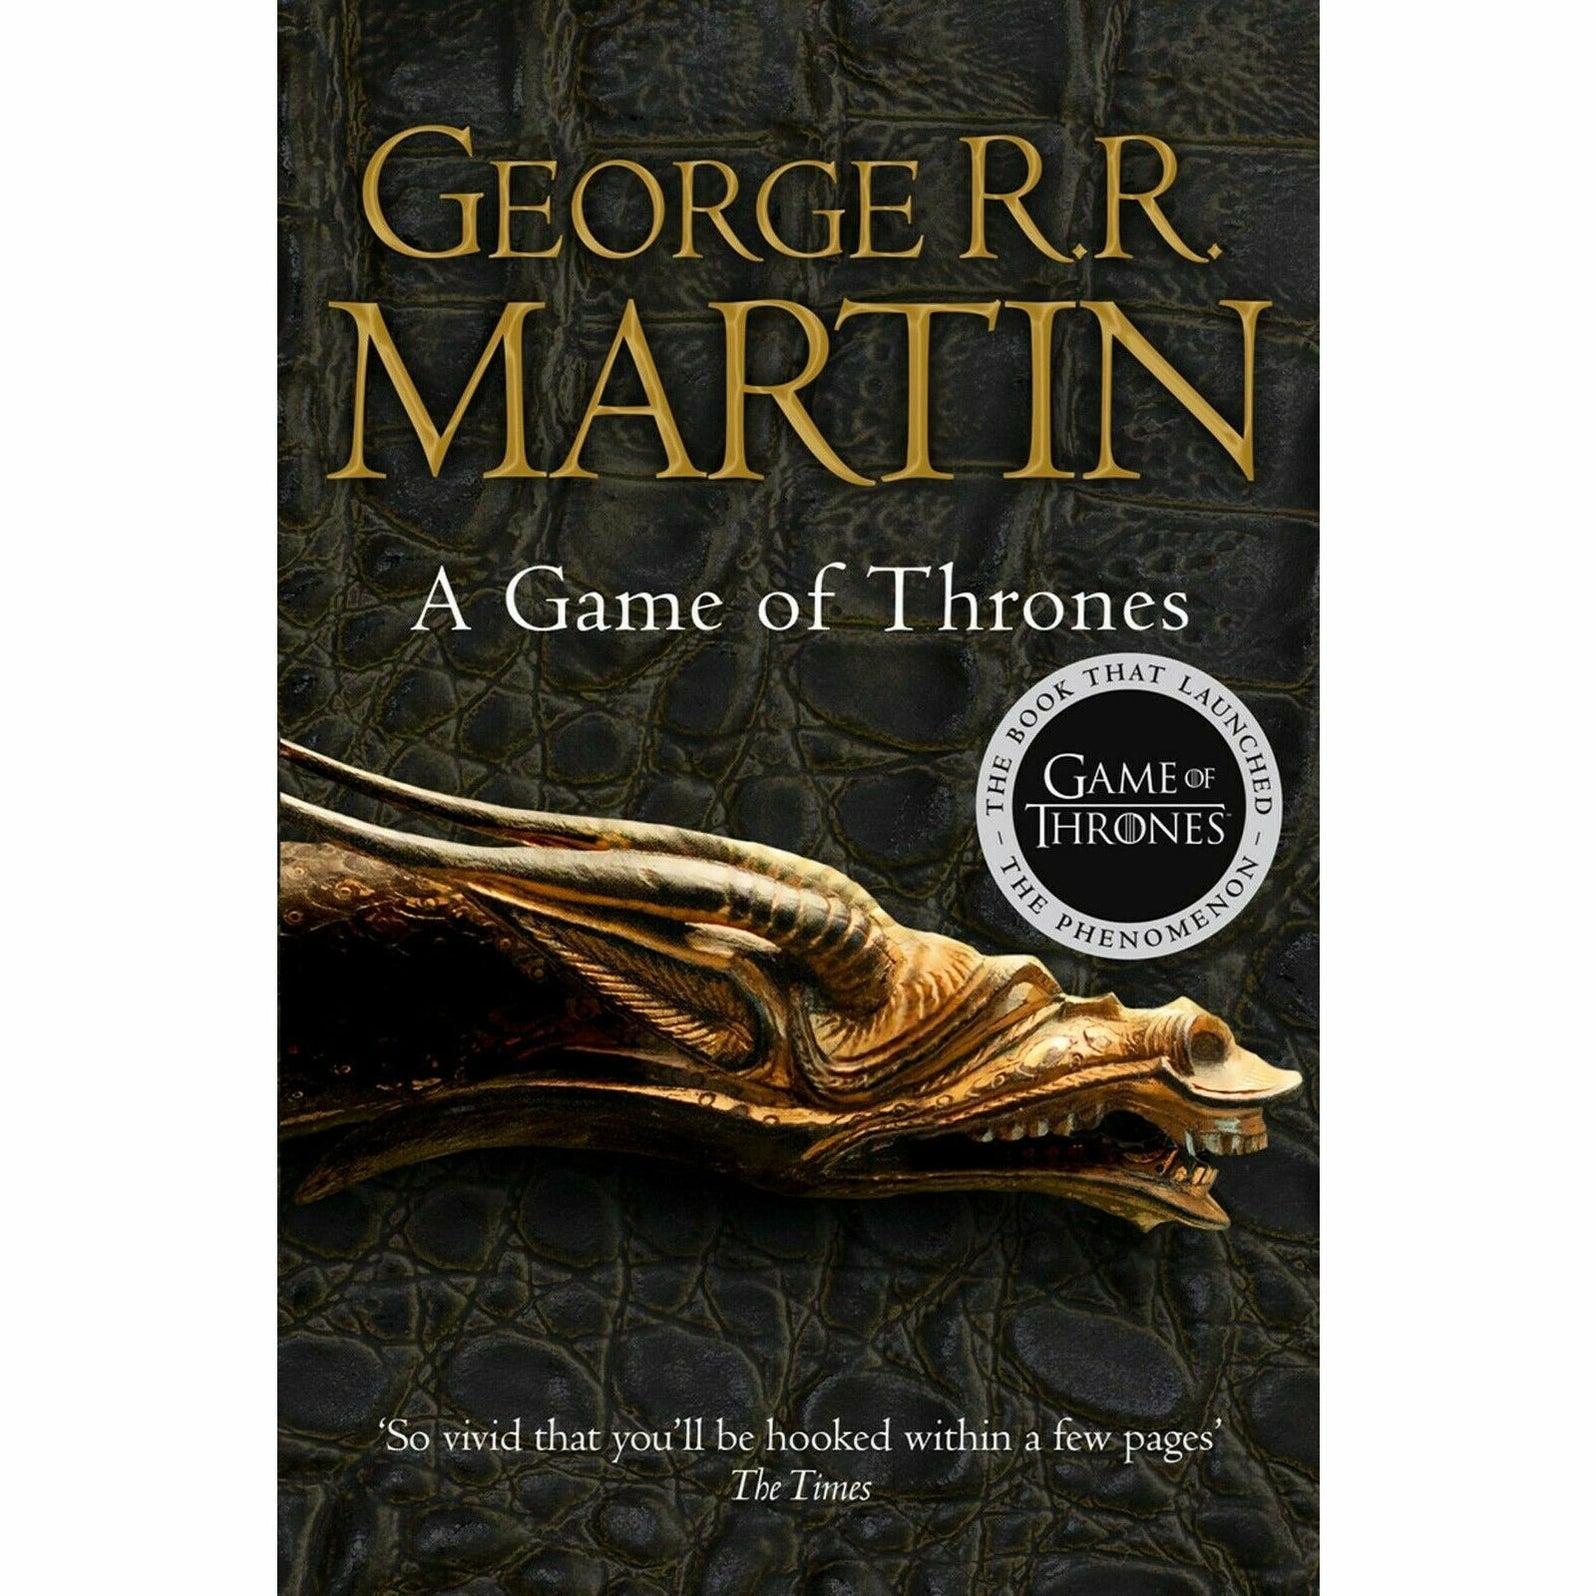 a song of ice and fire book 6